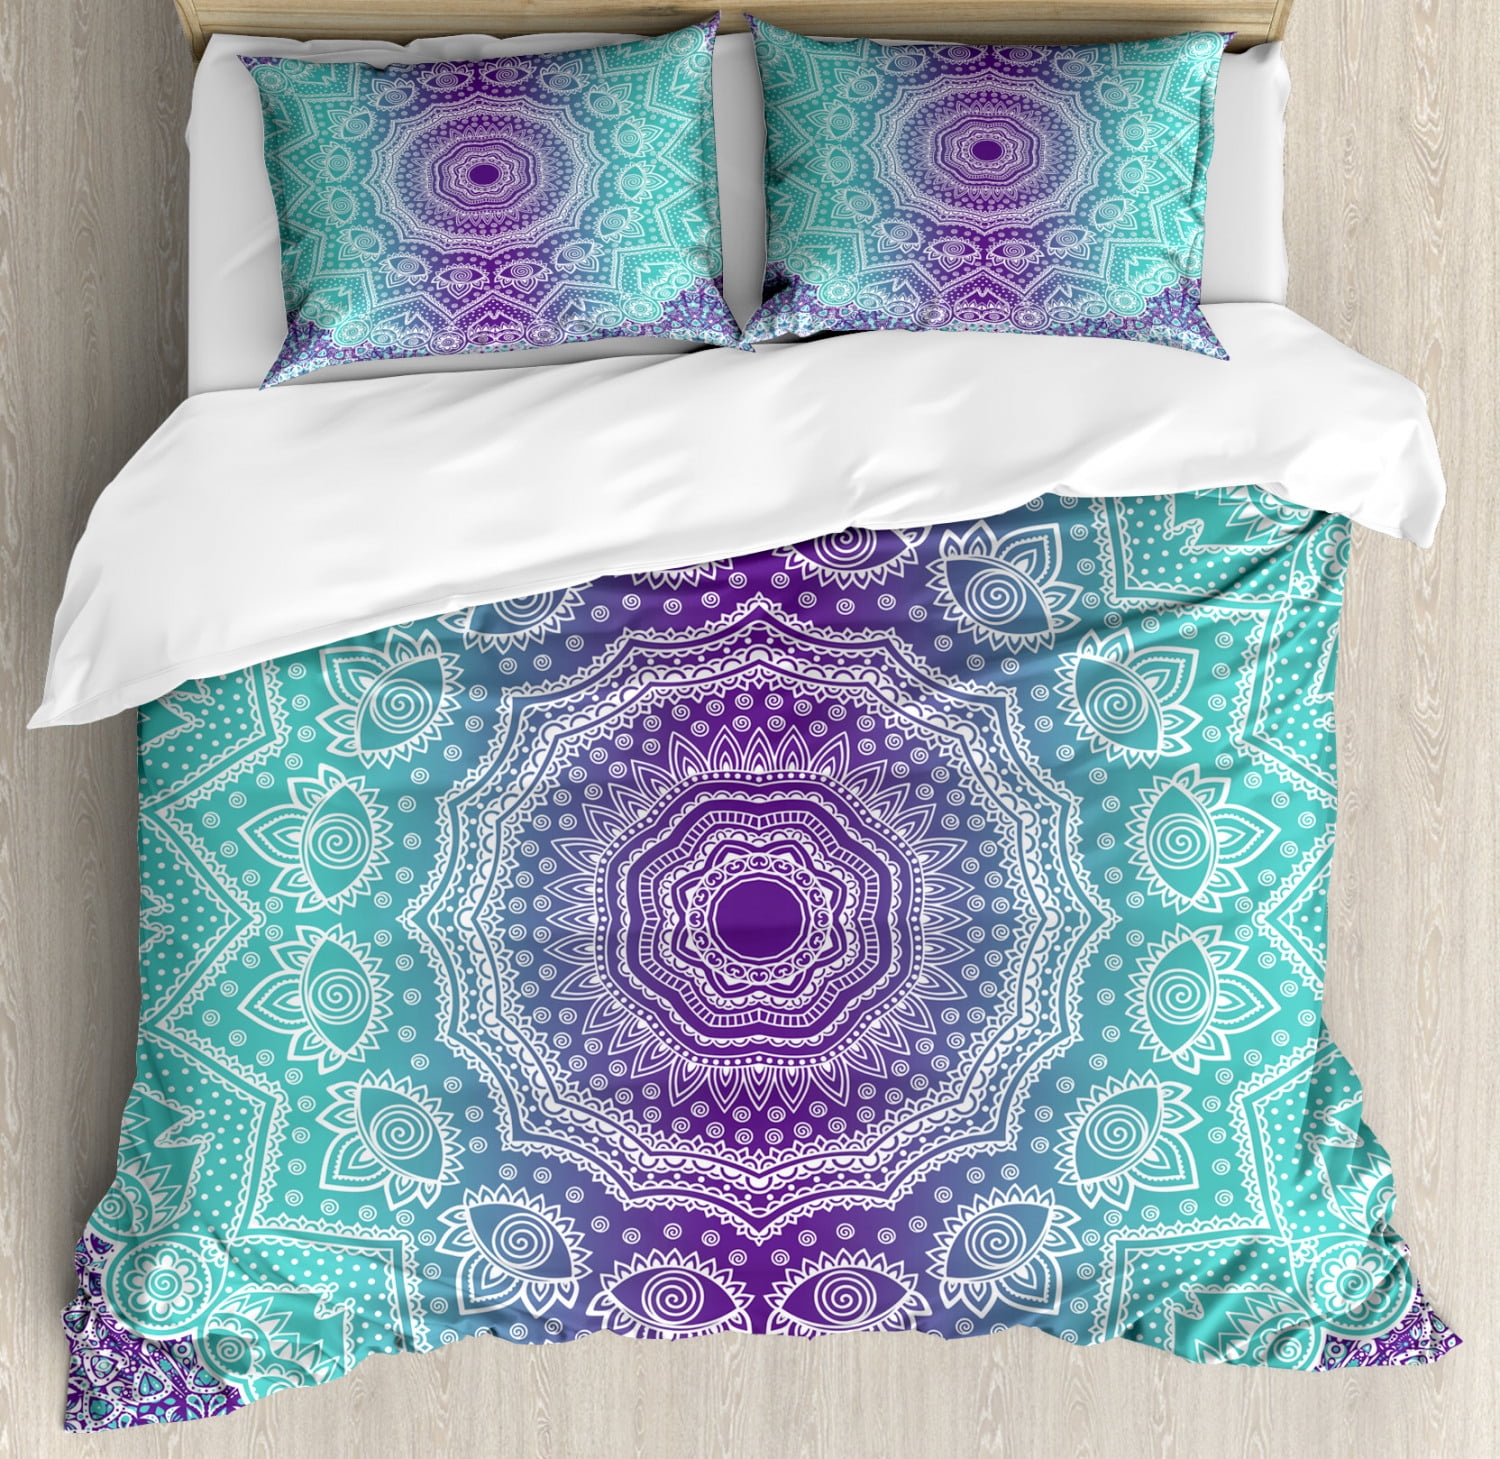 Turquoise Queen Size Duvet Cover Set, Turquoise Duvet Cover Twin Xl